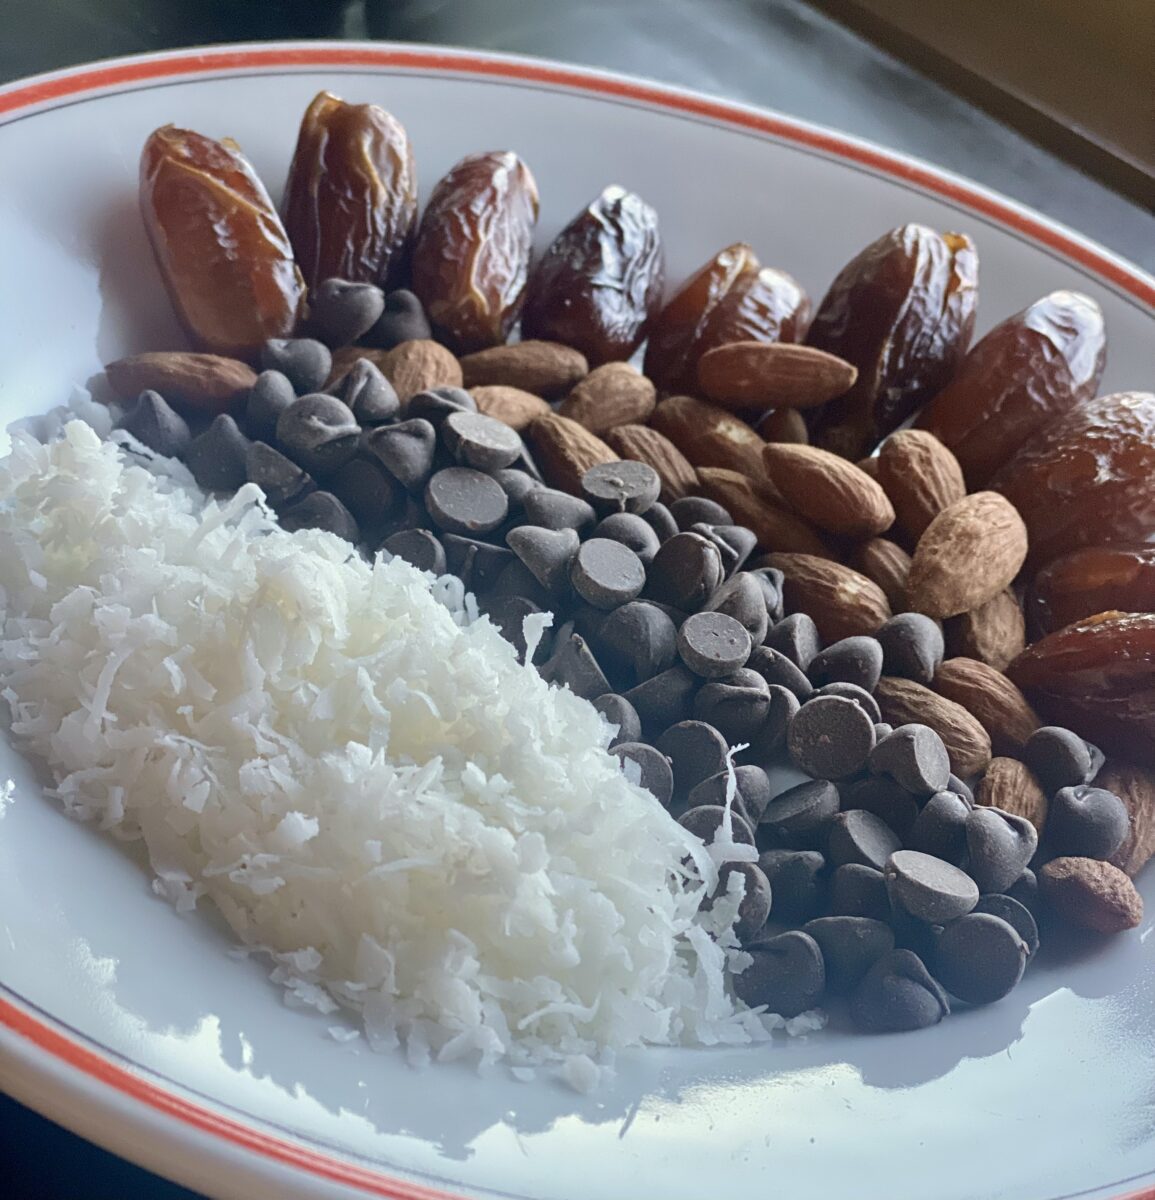 coconut, dark chocolate chips, almonds and dates on a white plate 